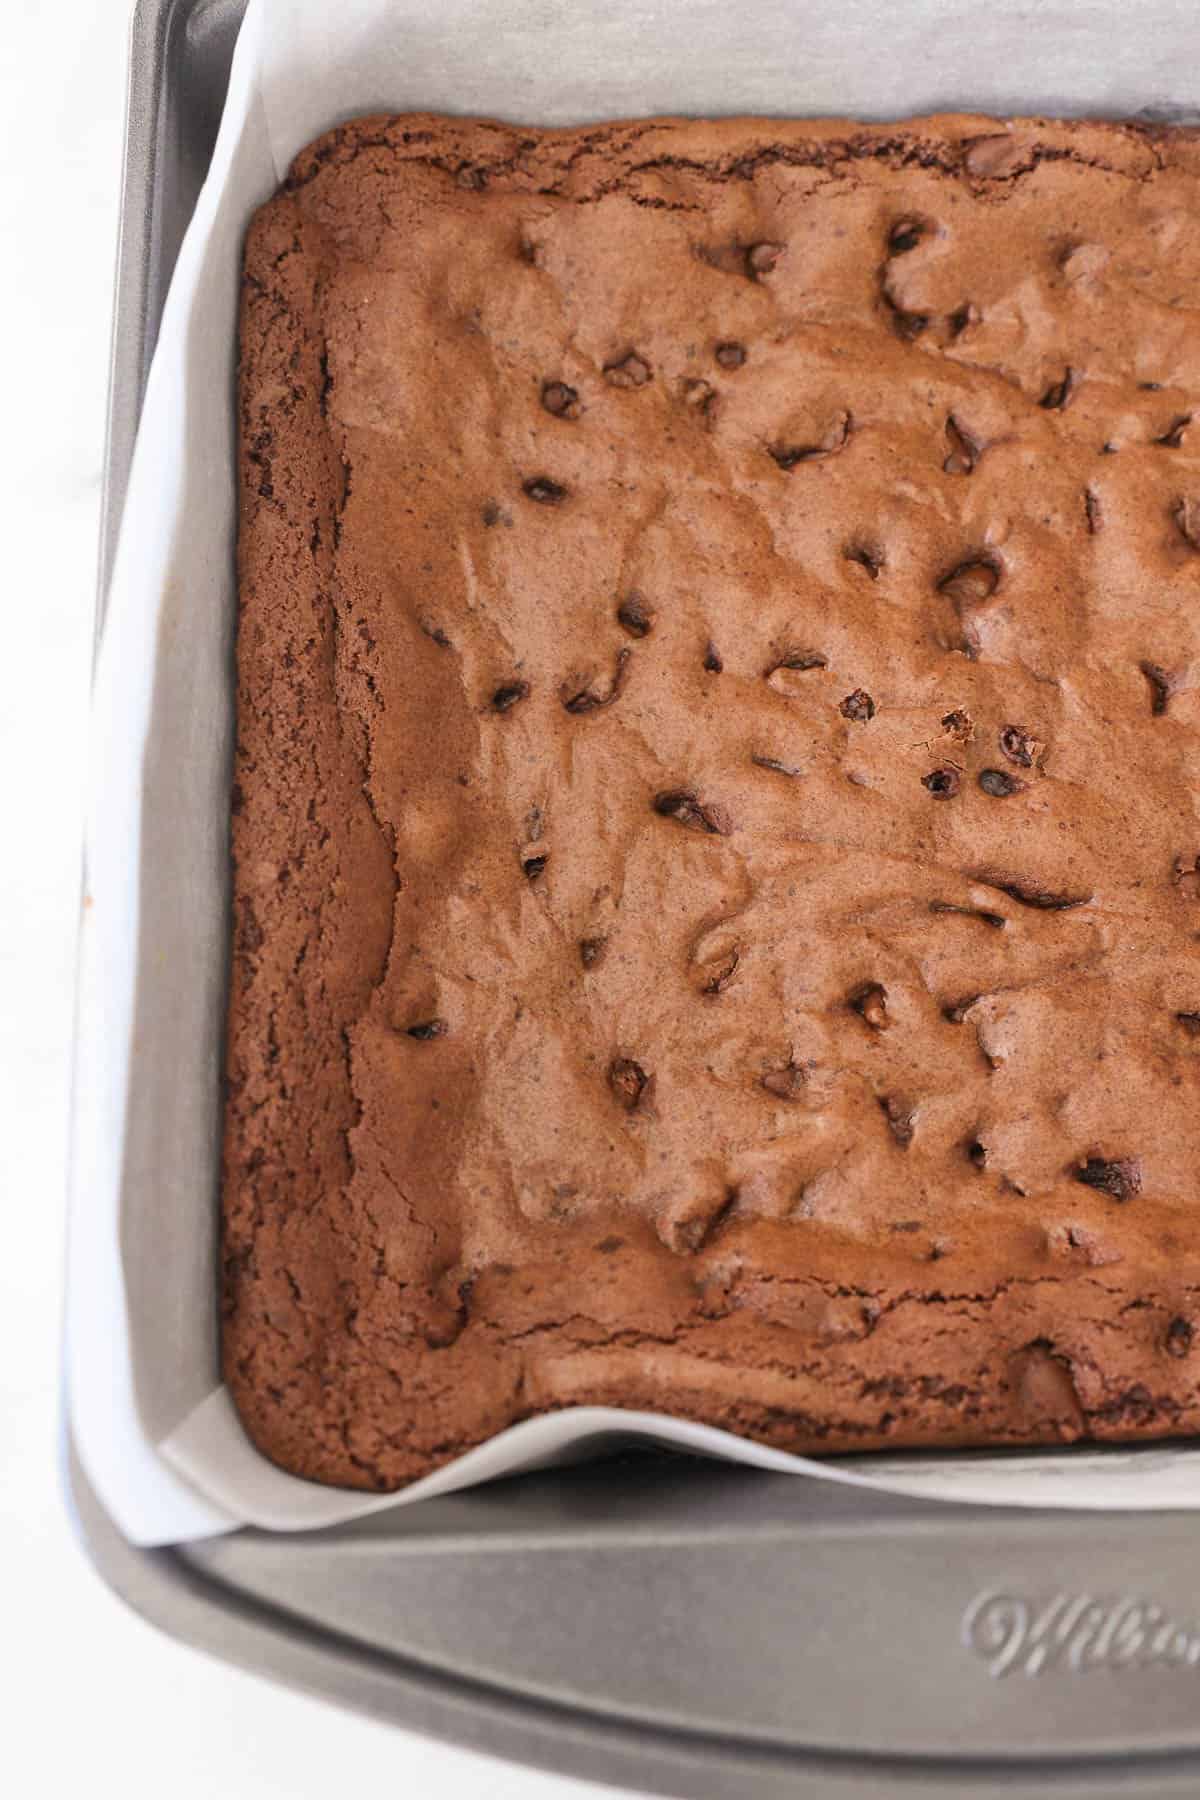 Overhead view of baked chocolate brownies in a parchment-lined pan.